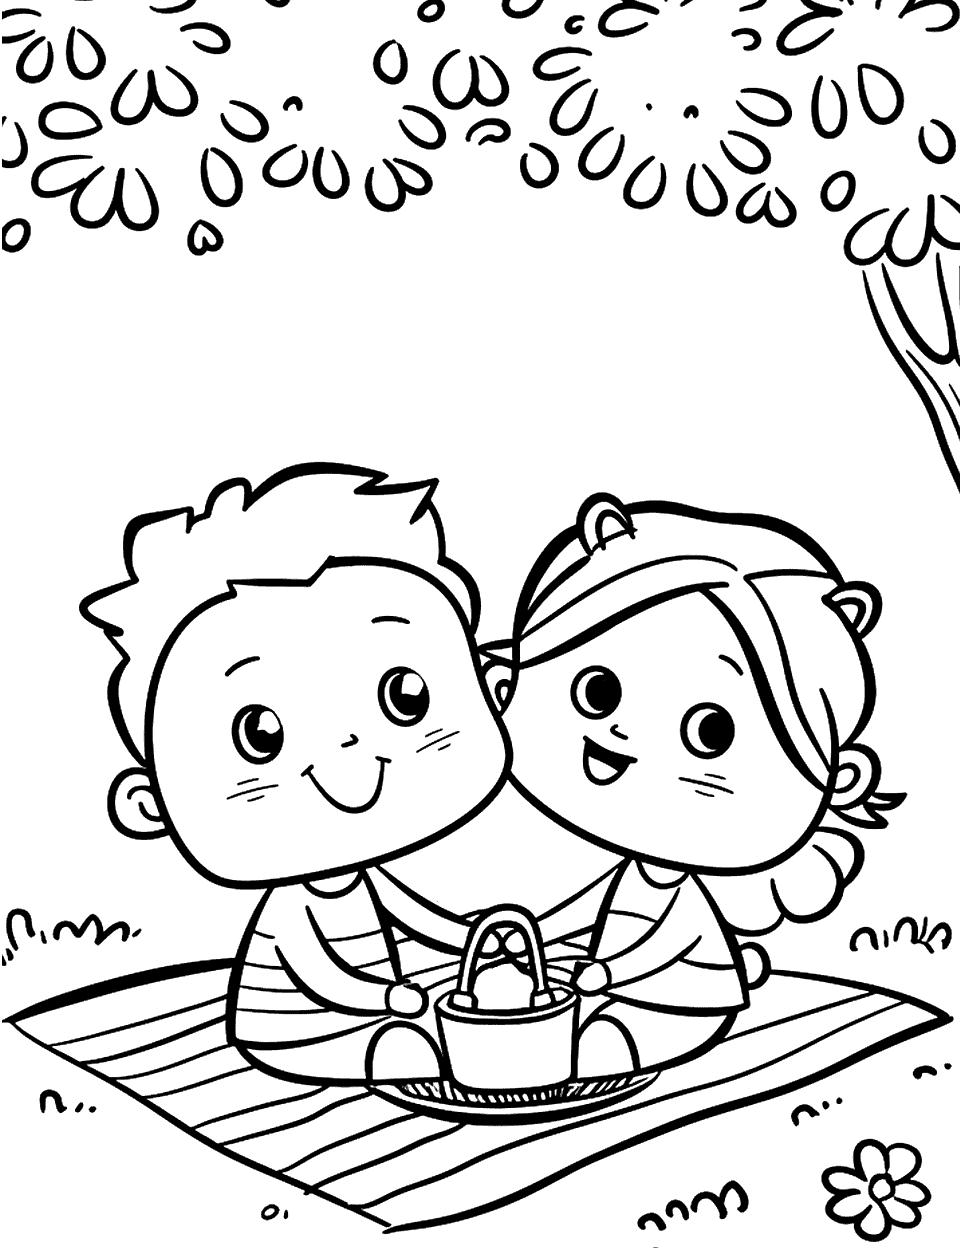 Summer Picnic Fun Toddler Coloring Page - A family sitting on a blanket in the park for a picnic.